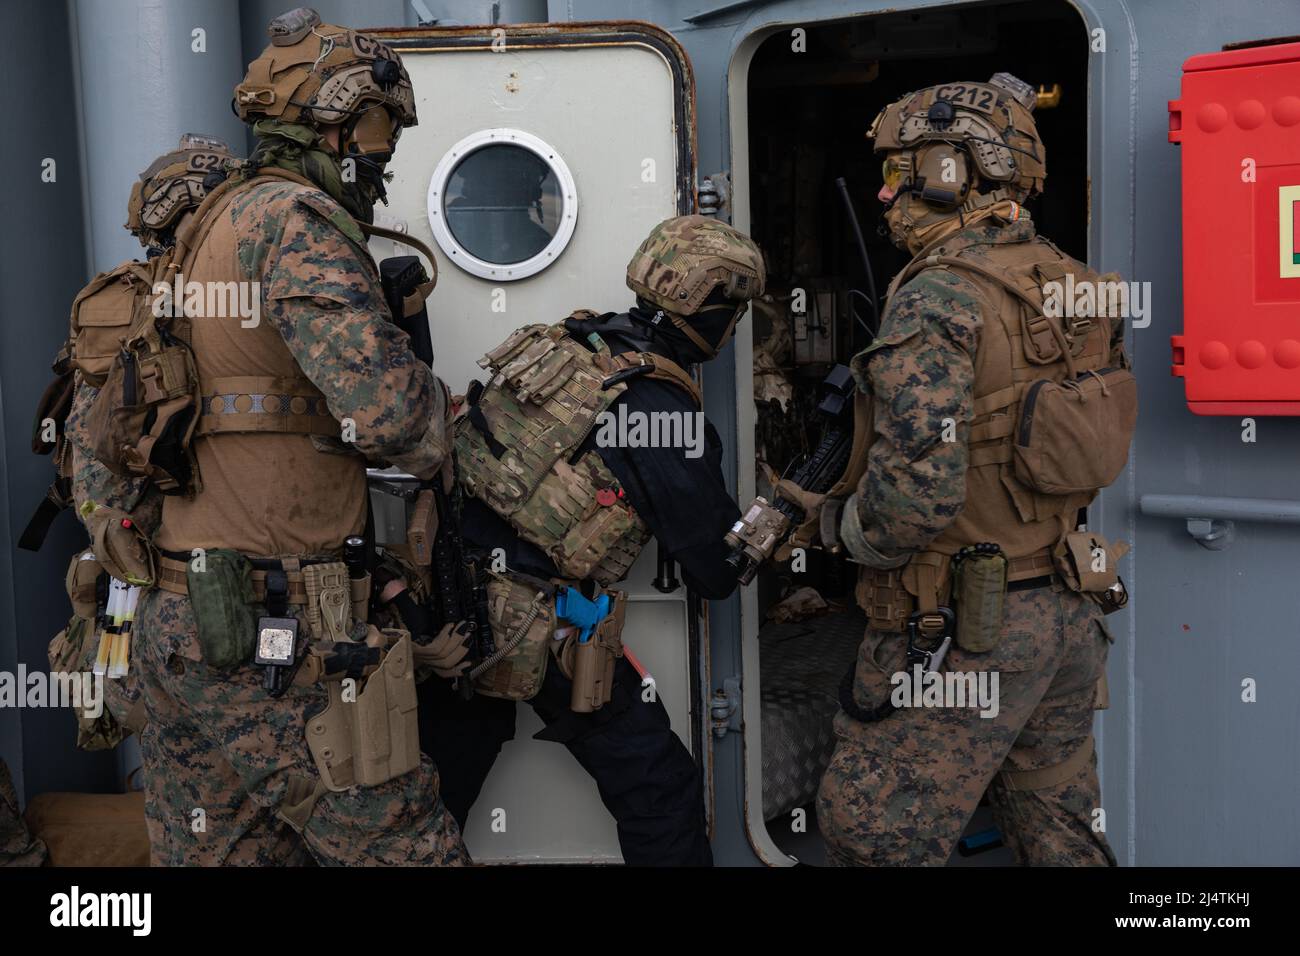 Royal Marines with 42 Commando and U.S. Marines with Charlie Company, 2nd Reconnaissance Battalion, assigned to 22nd Marine Expeditionary Unit, clear rooms during a visit, board, search, and seizure training mission in the Atlantic Ocean in support of exercise Northern Viking 2022, April 12, 2022. Northern Viking 22 strengthens interoperability and force readiness between the U.S., Iceland and Allied nations, enabling multi-domain command and control of joint and coalition forces in the defense of Iceland and Sea Lines of Communication in the Greenland, Iceland, United Kingdom (GIUK) gap. (U.S Stock Photo